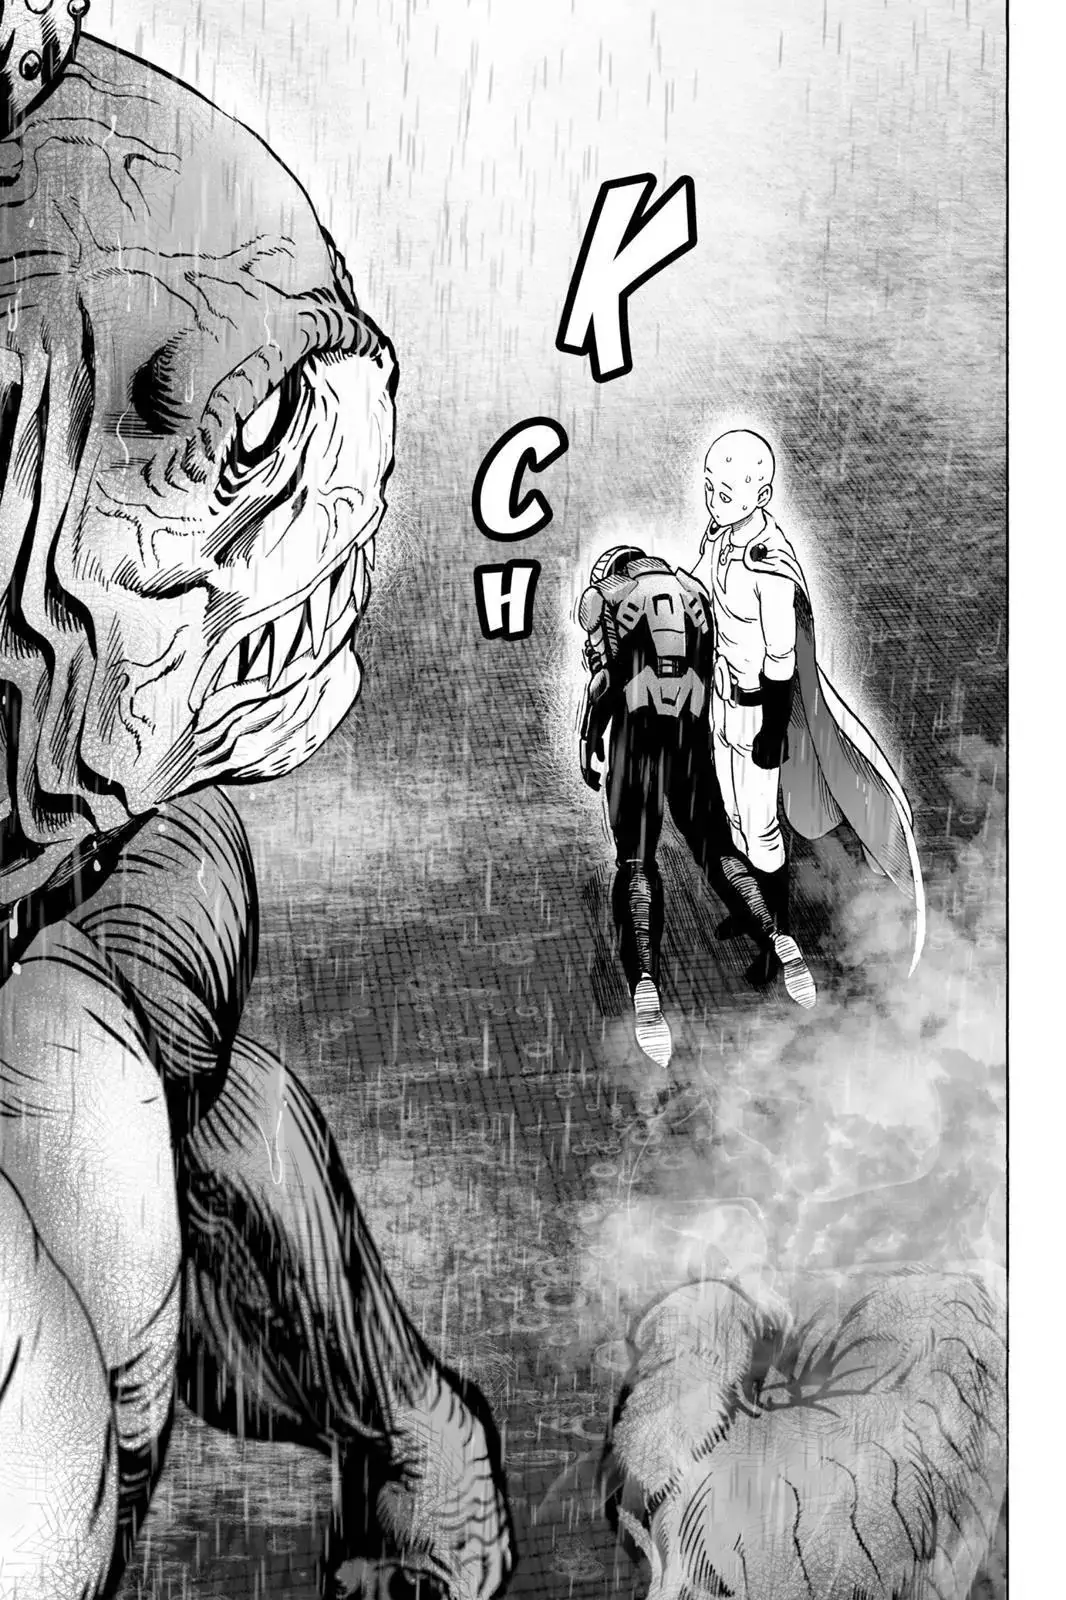 One Punch Man Chapter 27, READ One Punch Man Chapter 27 ONLINE, lost in the cloud genre,lost in the cloud gif,lost in the cloud girl,lost in the cloud goods,lost in the cloud goodreads,lost in the cloud,lost ark cloud gaming,lost odyssey cloud gaming,lost in the cloud fanart,lost in the cloud fanfic,lost in the cloud fandom,lost in the cloud first kiss,lost in the cloud font,lost in the cloud ending,lost in the cloud episode 97,lost in the cloud edit,lost in the cloud explained,lost in the cloud dog,lost in the cloud discord server,lost in the cloud desktop wallpaper,lost in the cloud drawing,can't find my cloud on network,lost in the cloud characters,lost in the cloud chapter 93 release date,lost in the cloud birthday,lost in the cloud birthday art,lost in the cloud background,lost in the cloud banner,lost in the clouds meaning,what is the black cloud in lost,lost in the cloud ao3,lost in the cloud anime,lost in the cloud art,lost in the cloud author twitter,lost in the cloud author instagram,lost in the cloud artist,lost in the cloud acrylic stand,lost in the cloud artist twitter,lost in the cloud art style,lost in the cloud analysis